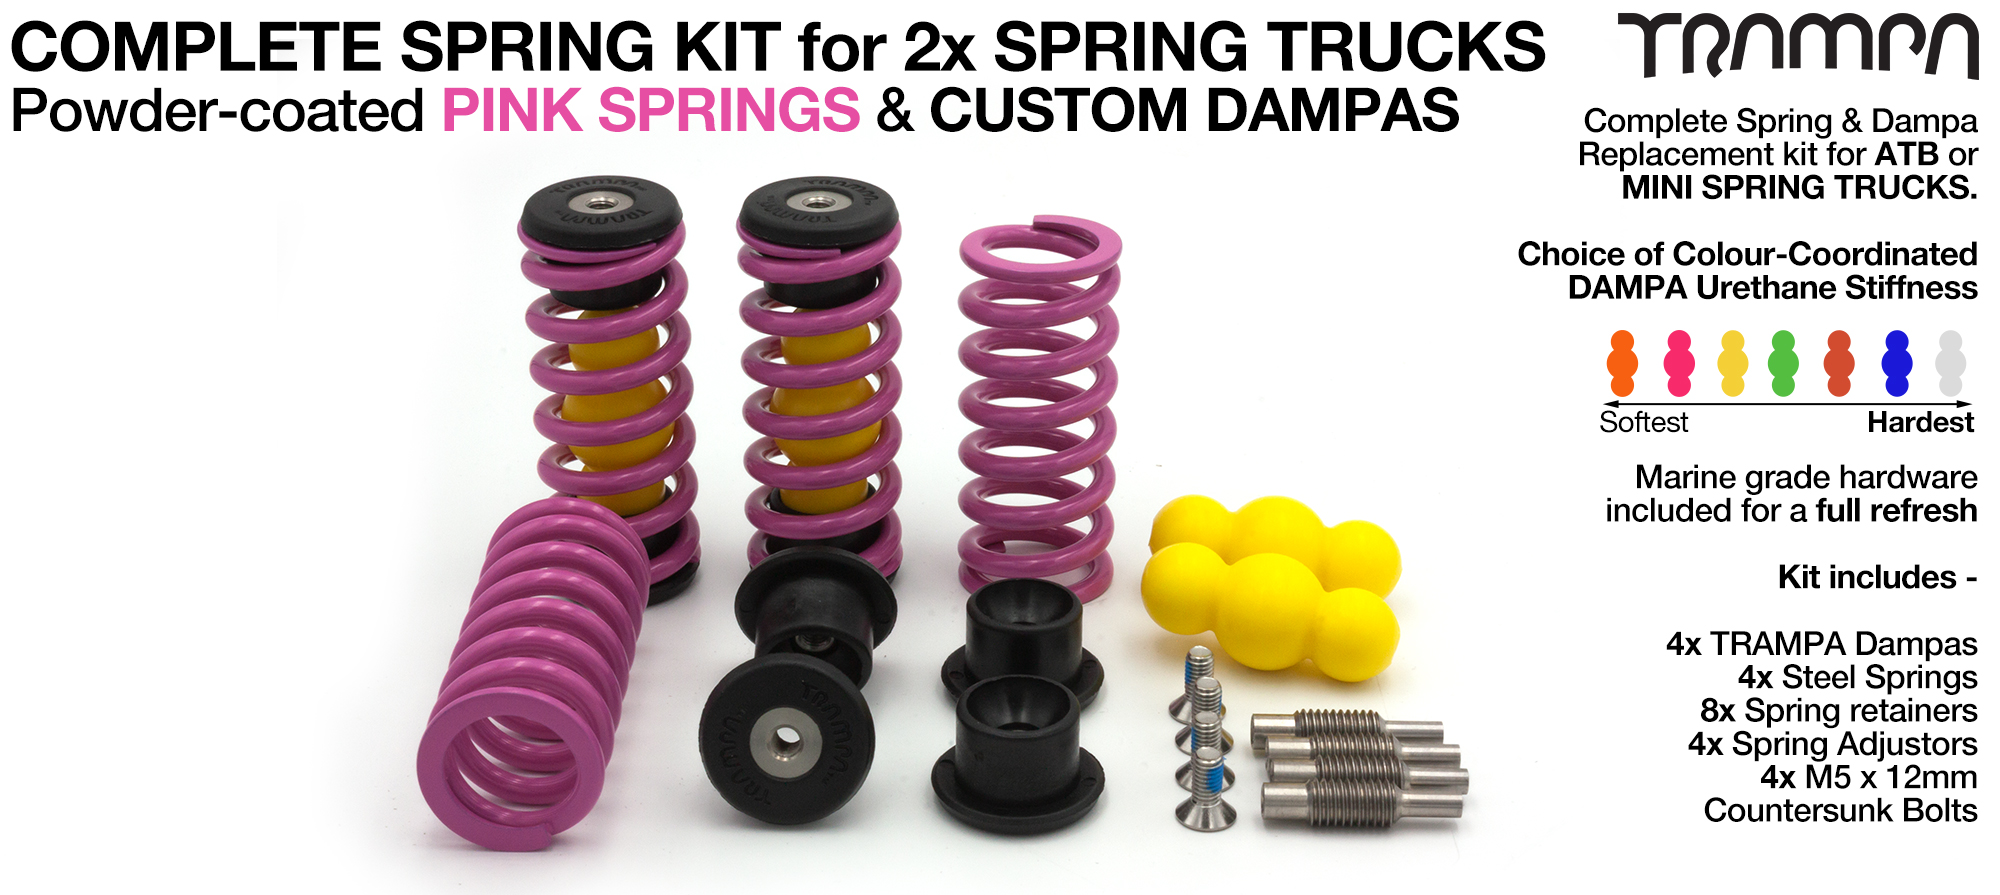 Complete Spring kit for 1x Board = 4x PINK Springs 4x Dampa 8x Spring Retainers 4x Spring Adjuster & 4 M5x12mm Countersunk Bolt